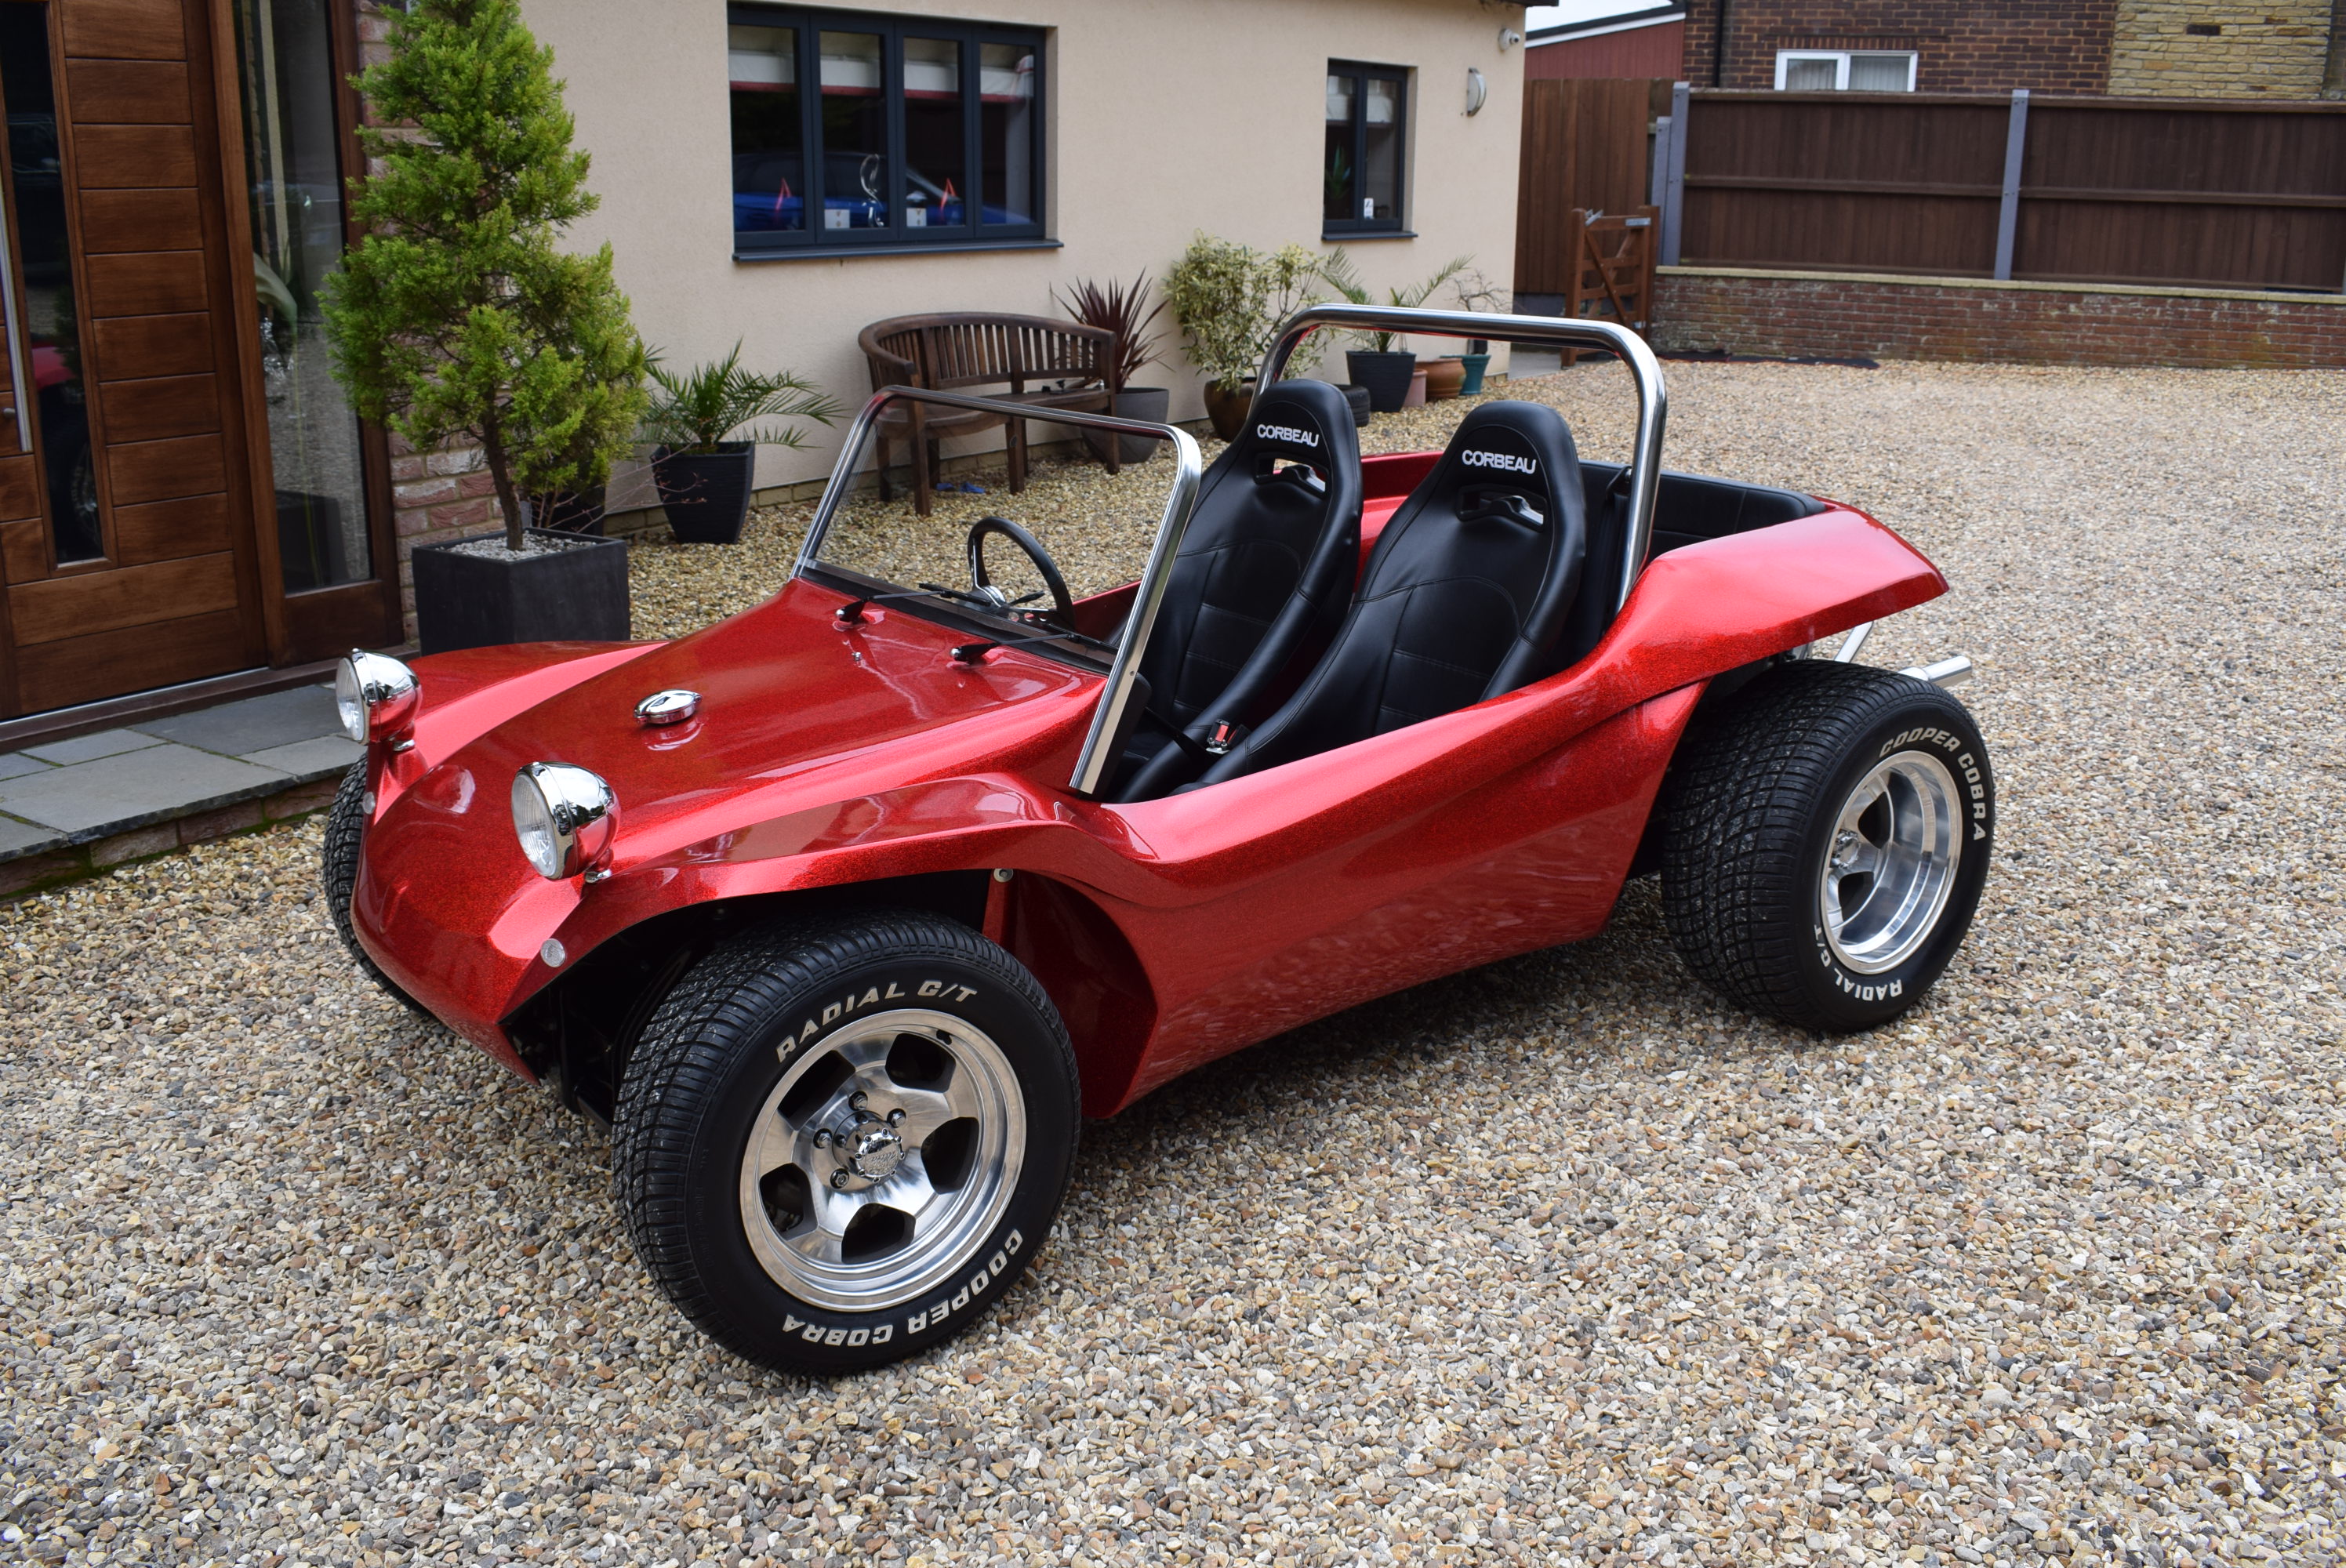 red beach buggy